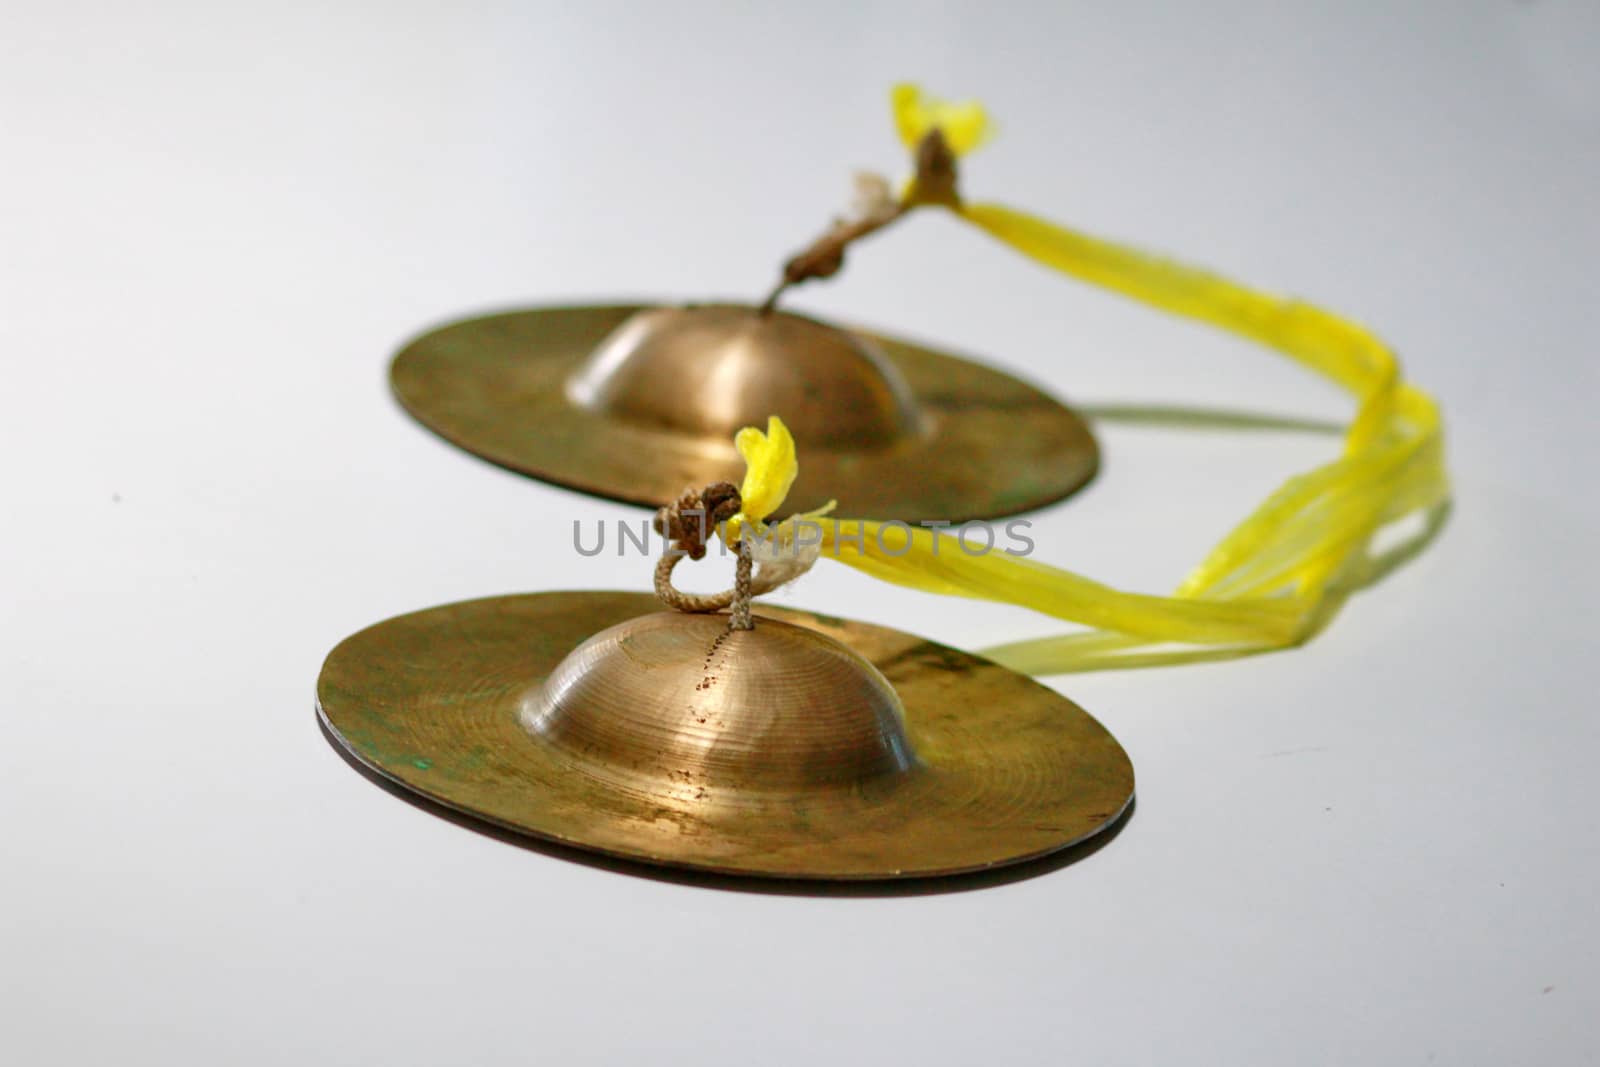 It is a pair of northern Thailand traditional cymbals.